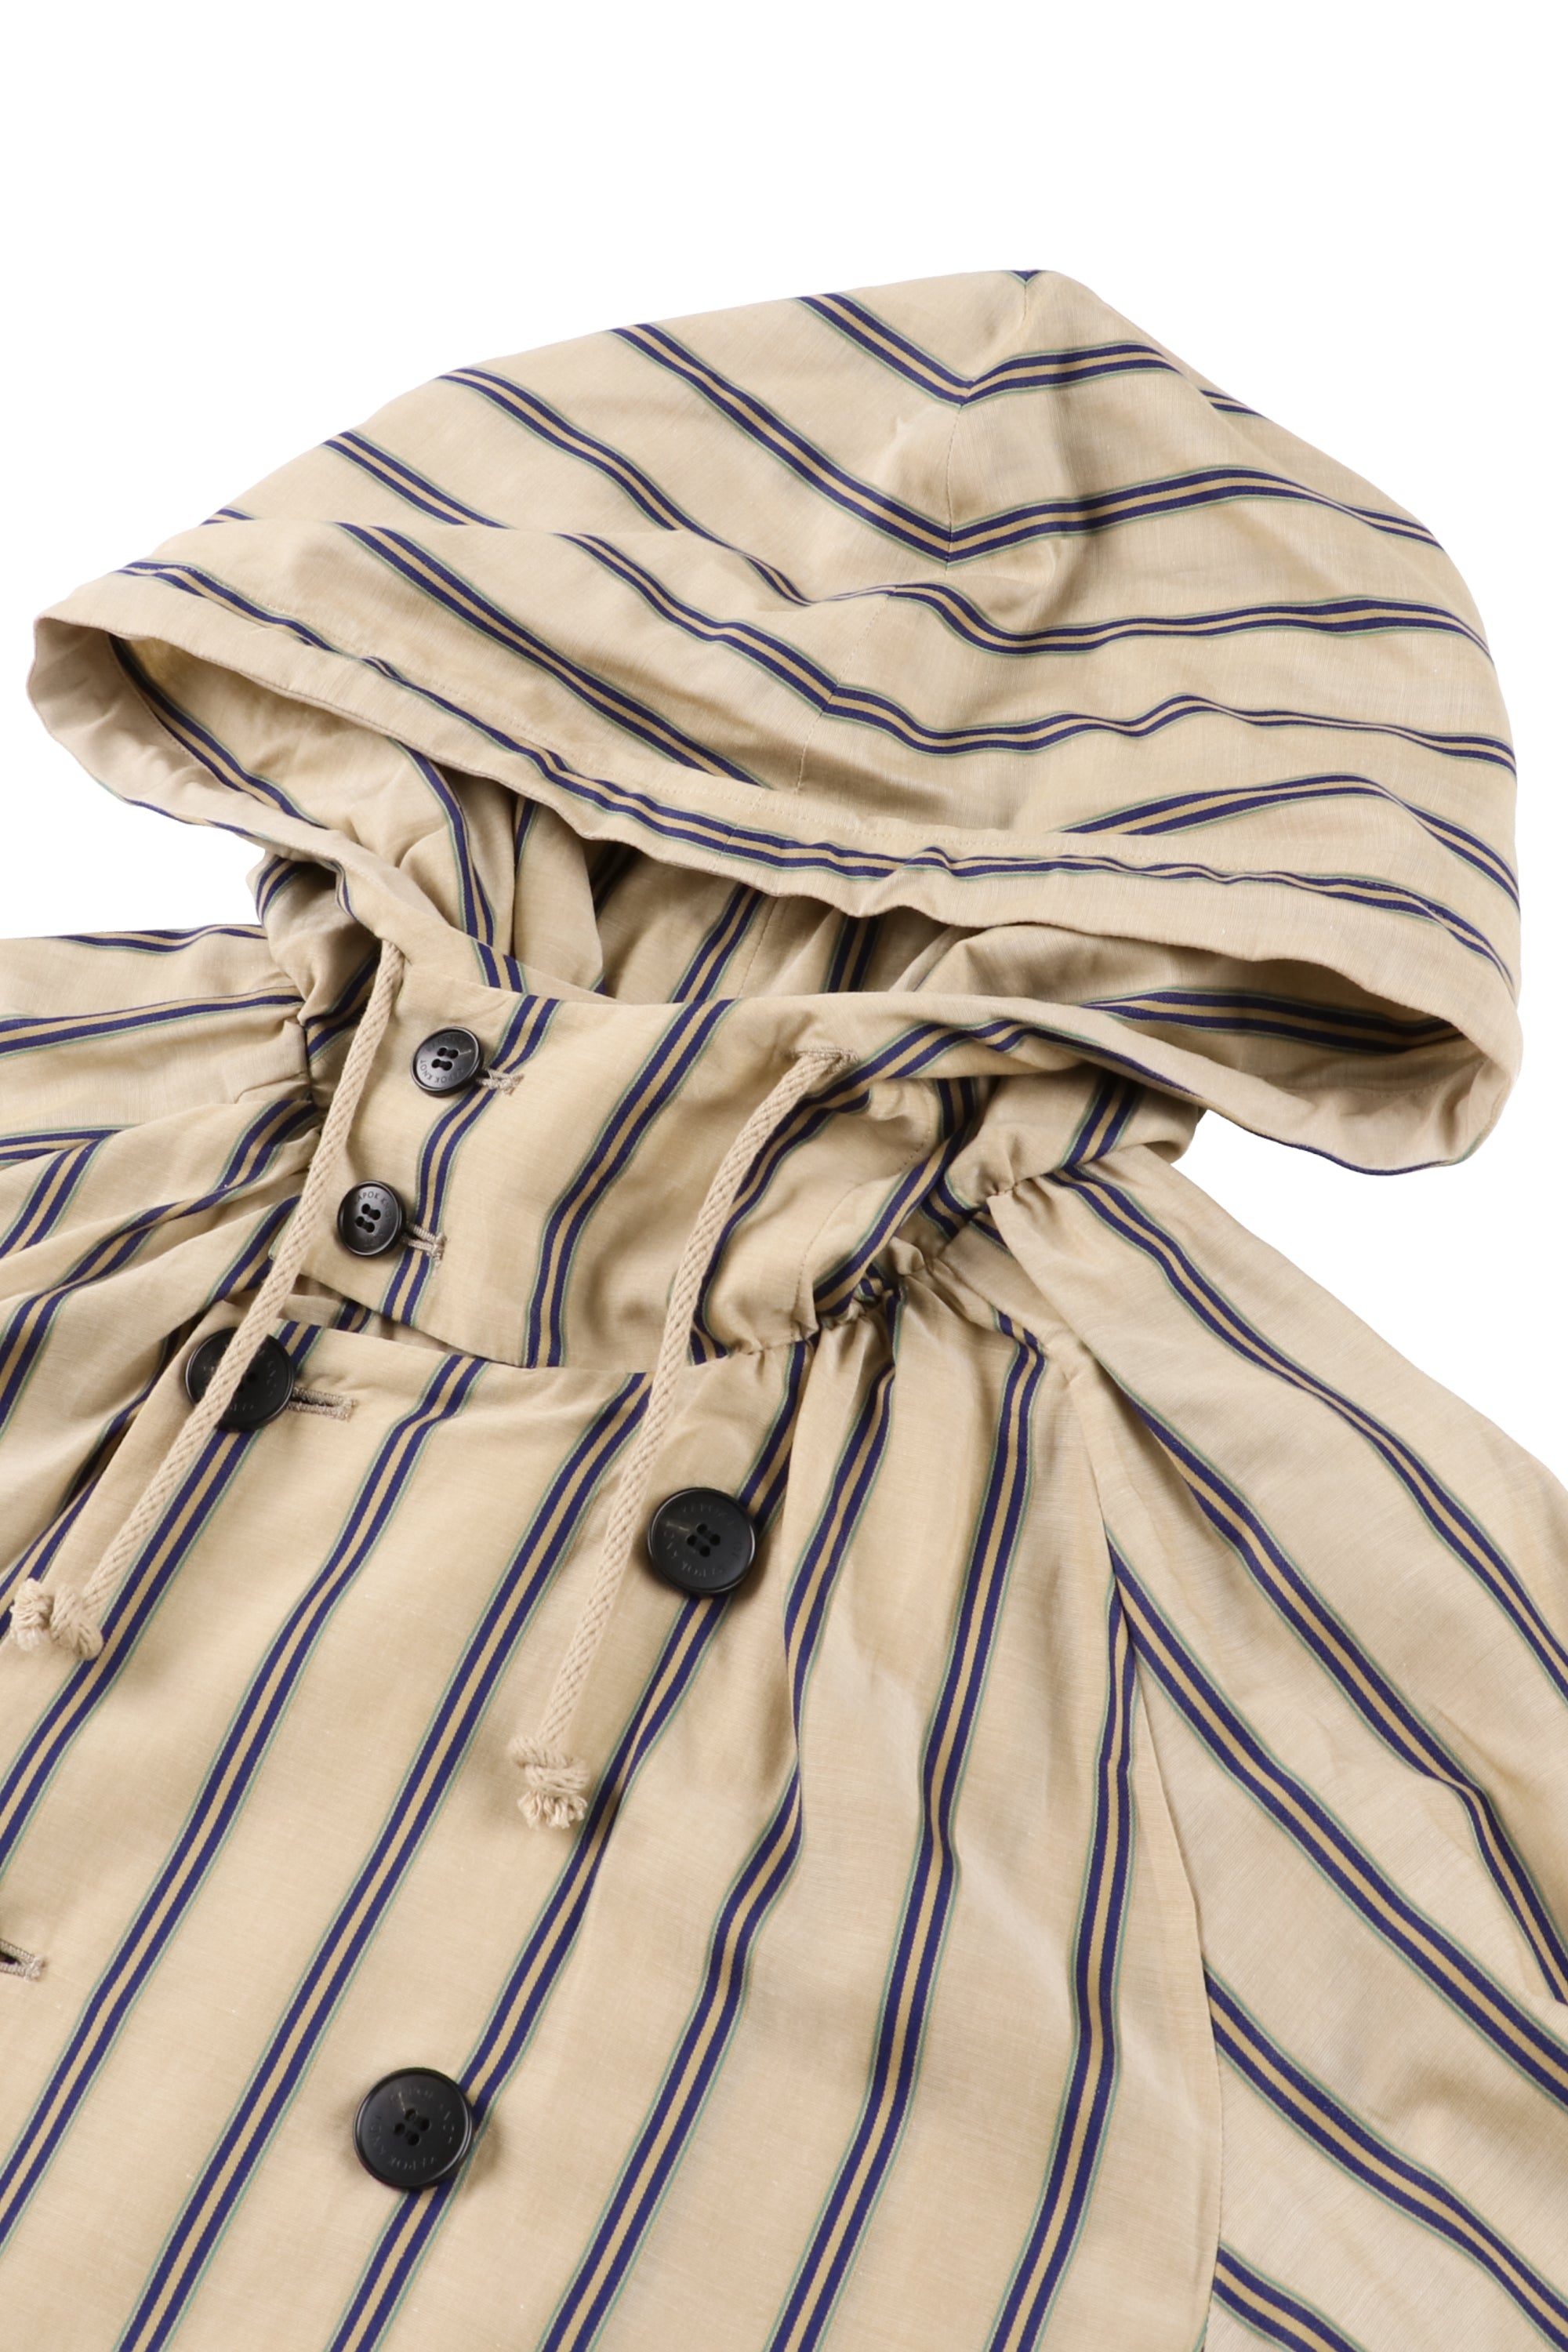 Hood trench: Striped - Unisex 